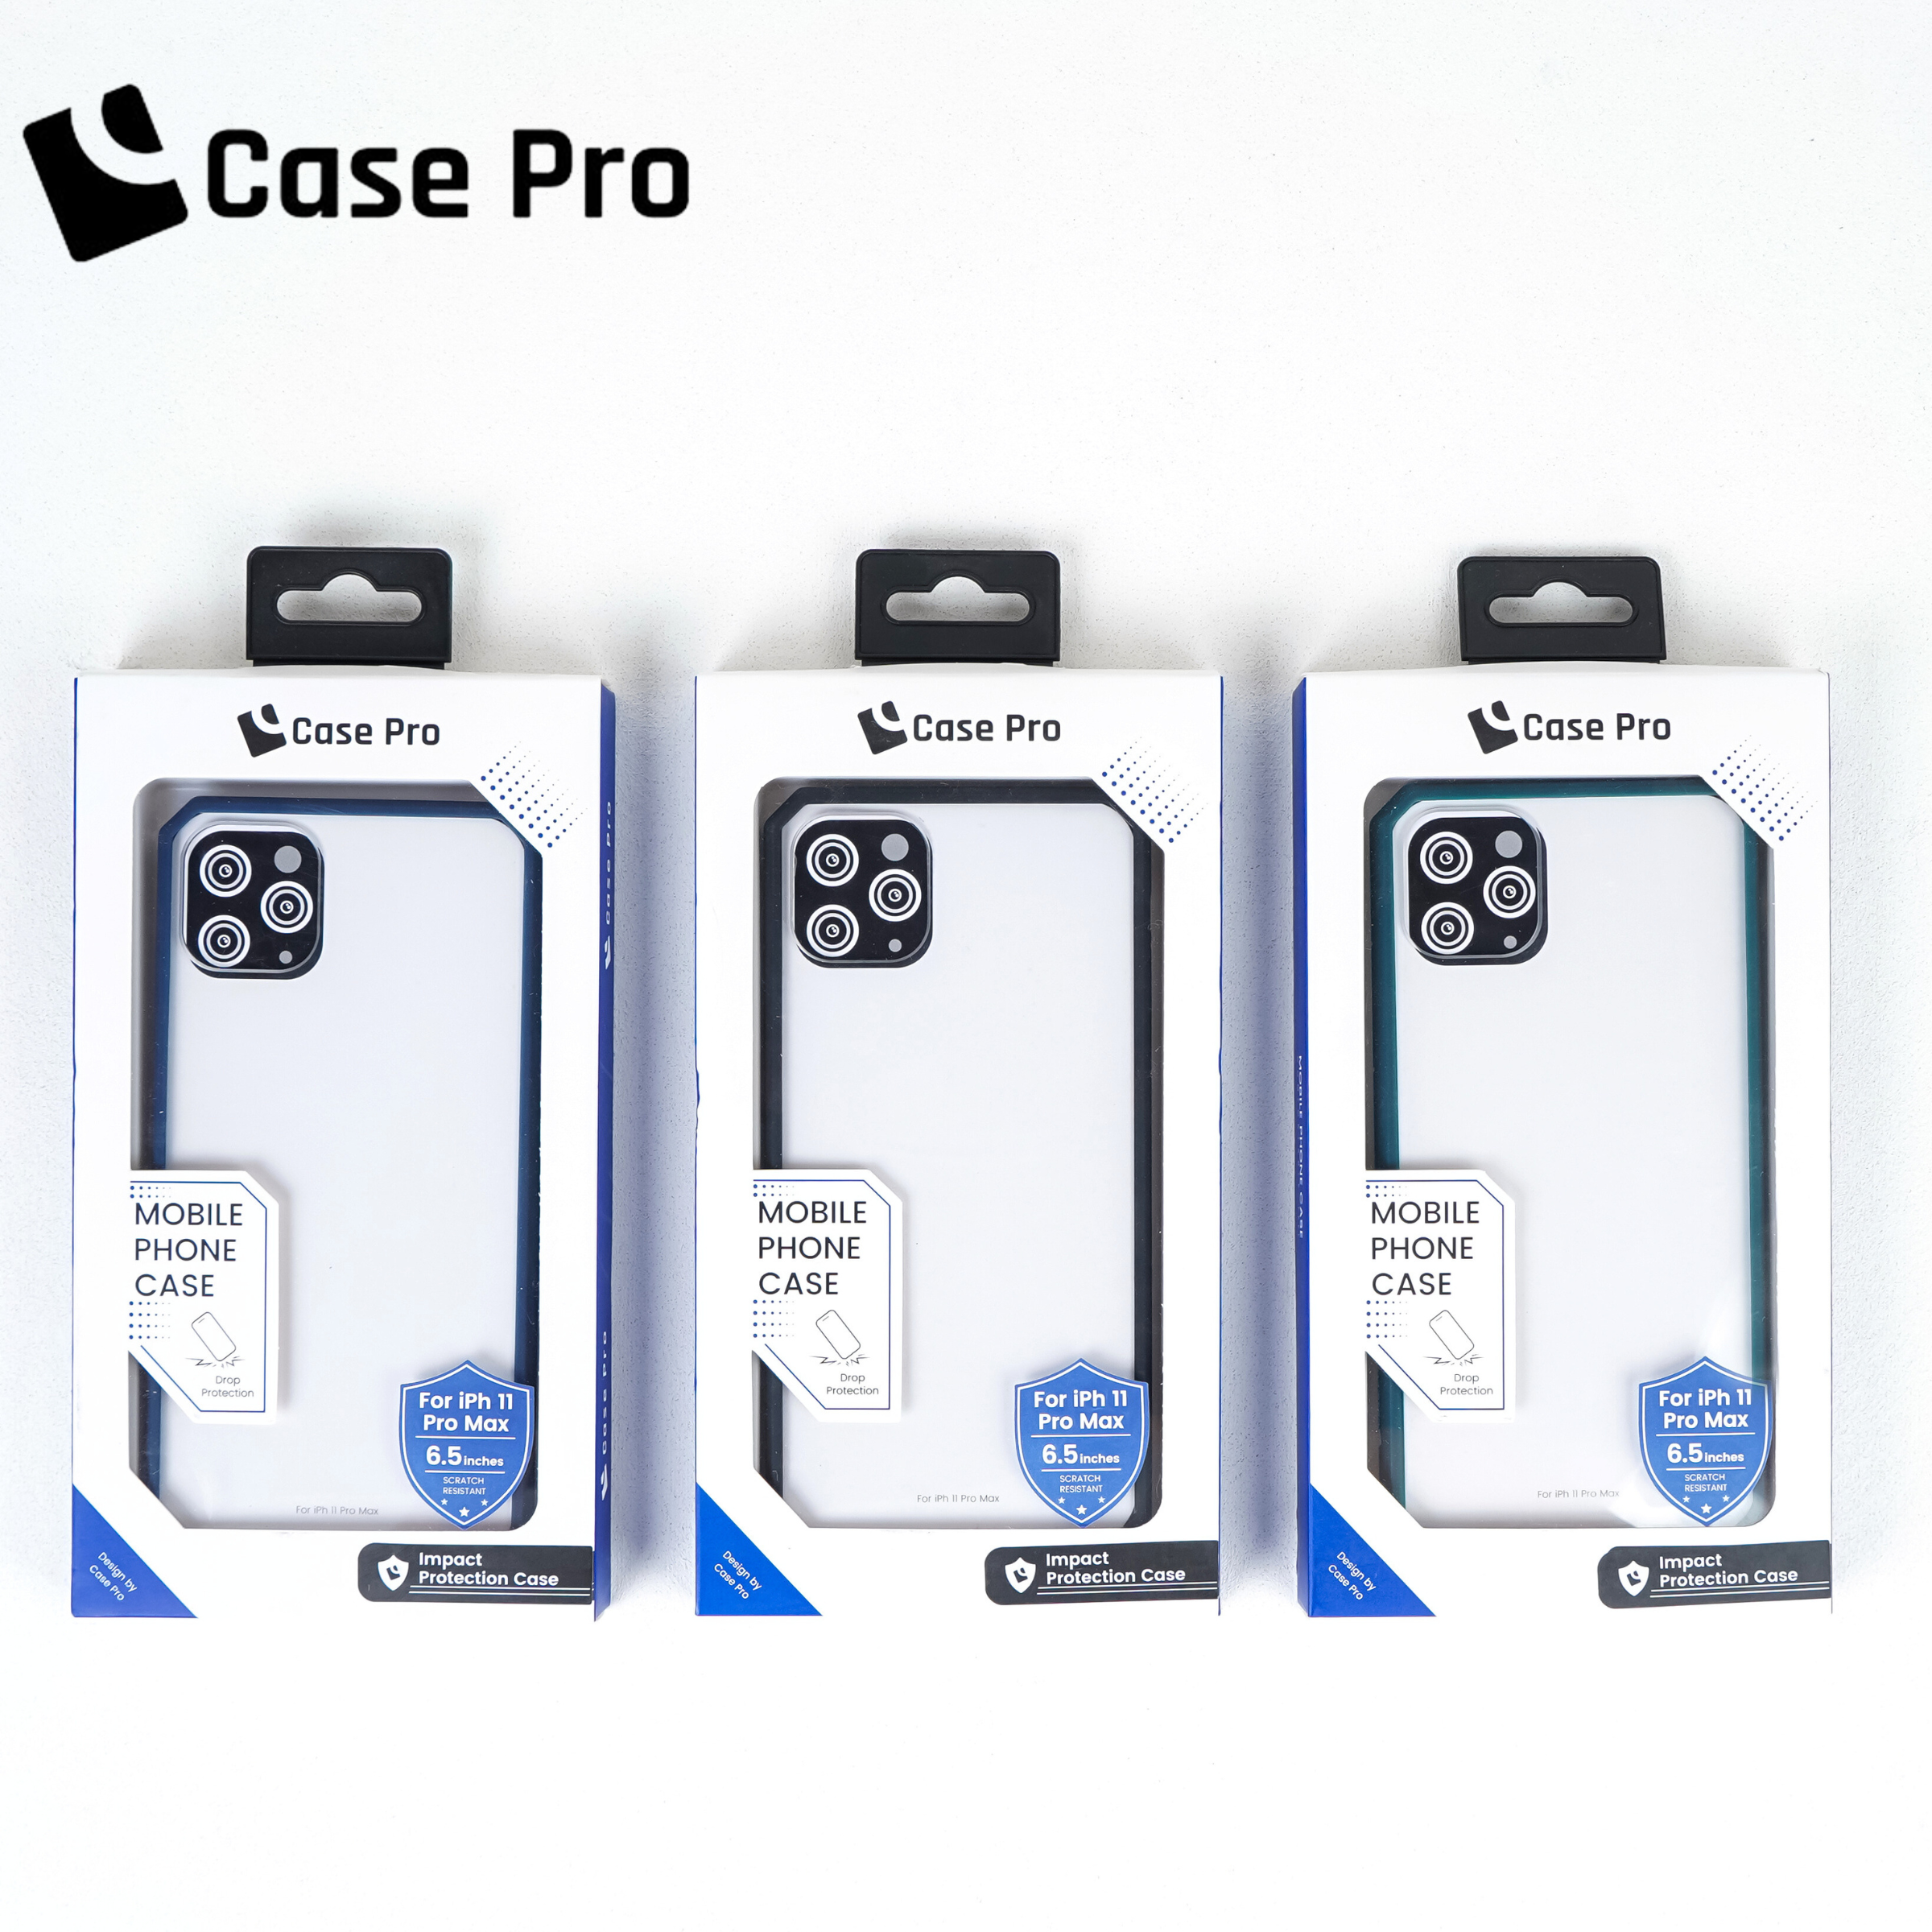 CASE PRO IMPACT PROTECTION CASE FOR IPH 11 PRO MAX (6.5")